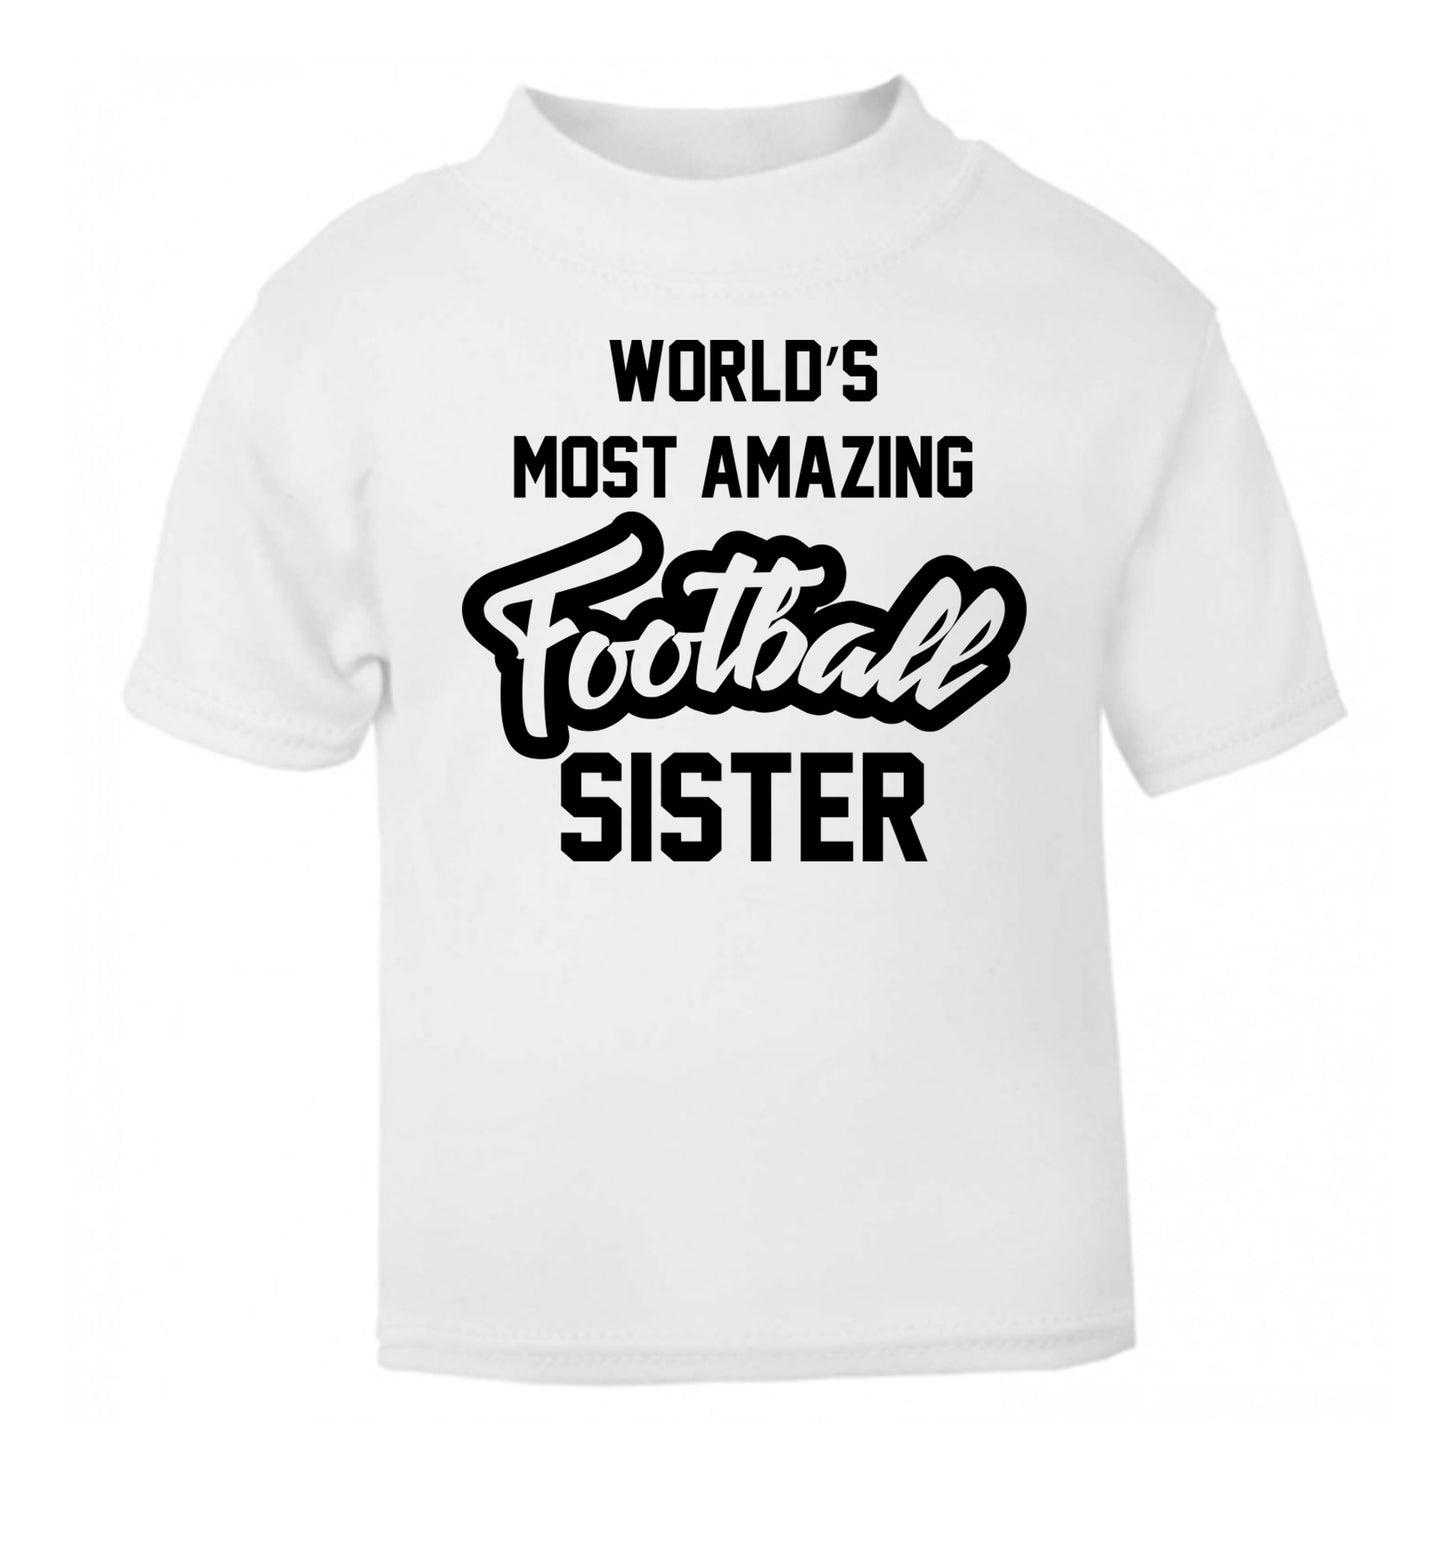 Worlds most amazing football sister white Baby Toddler Tshirt 2 Years